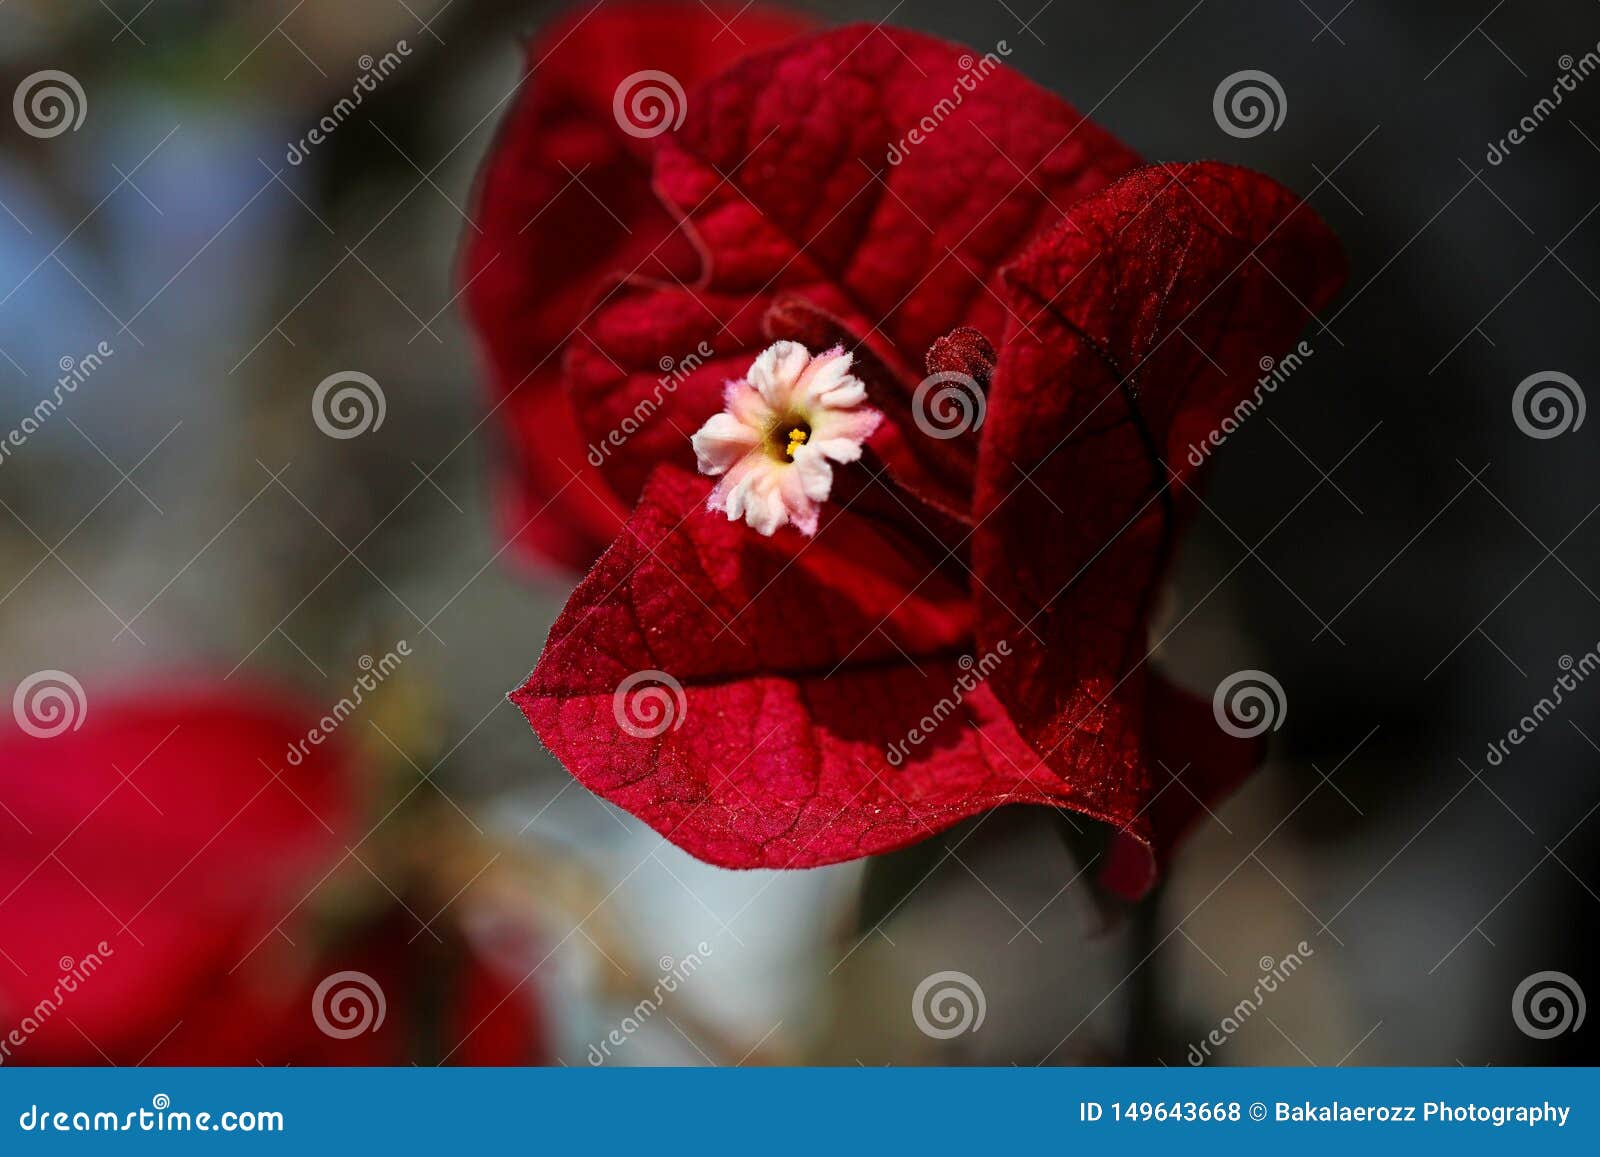 bougainvillea red flower macro background wallpaper high quality prints 50,6 megapixels products